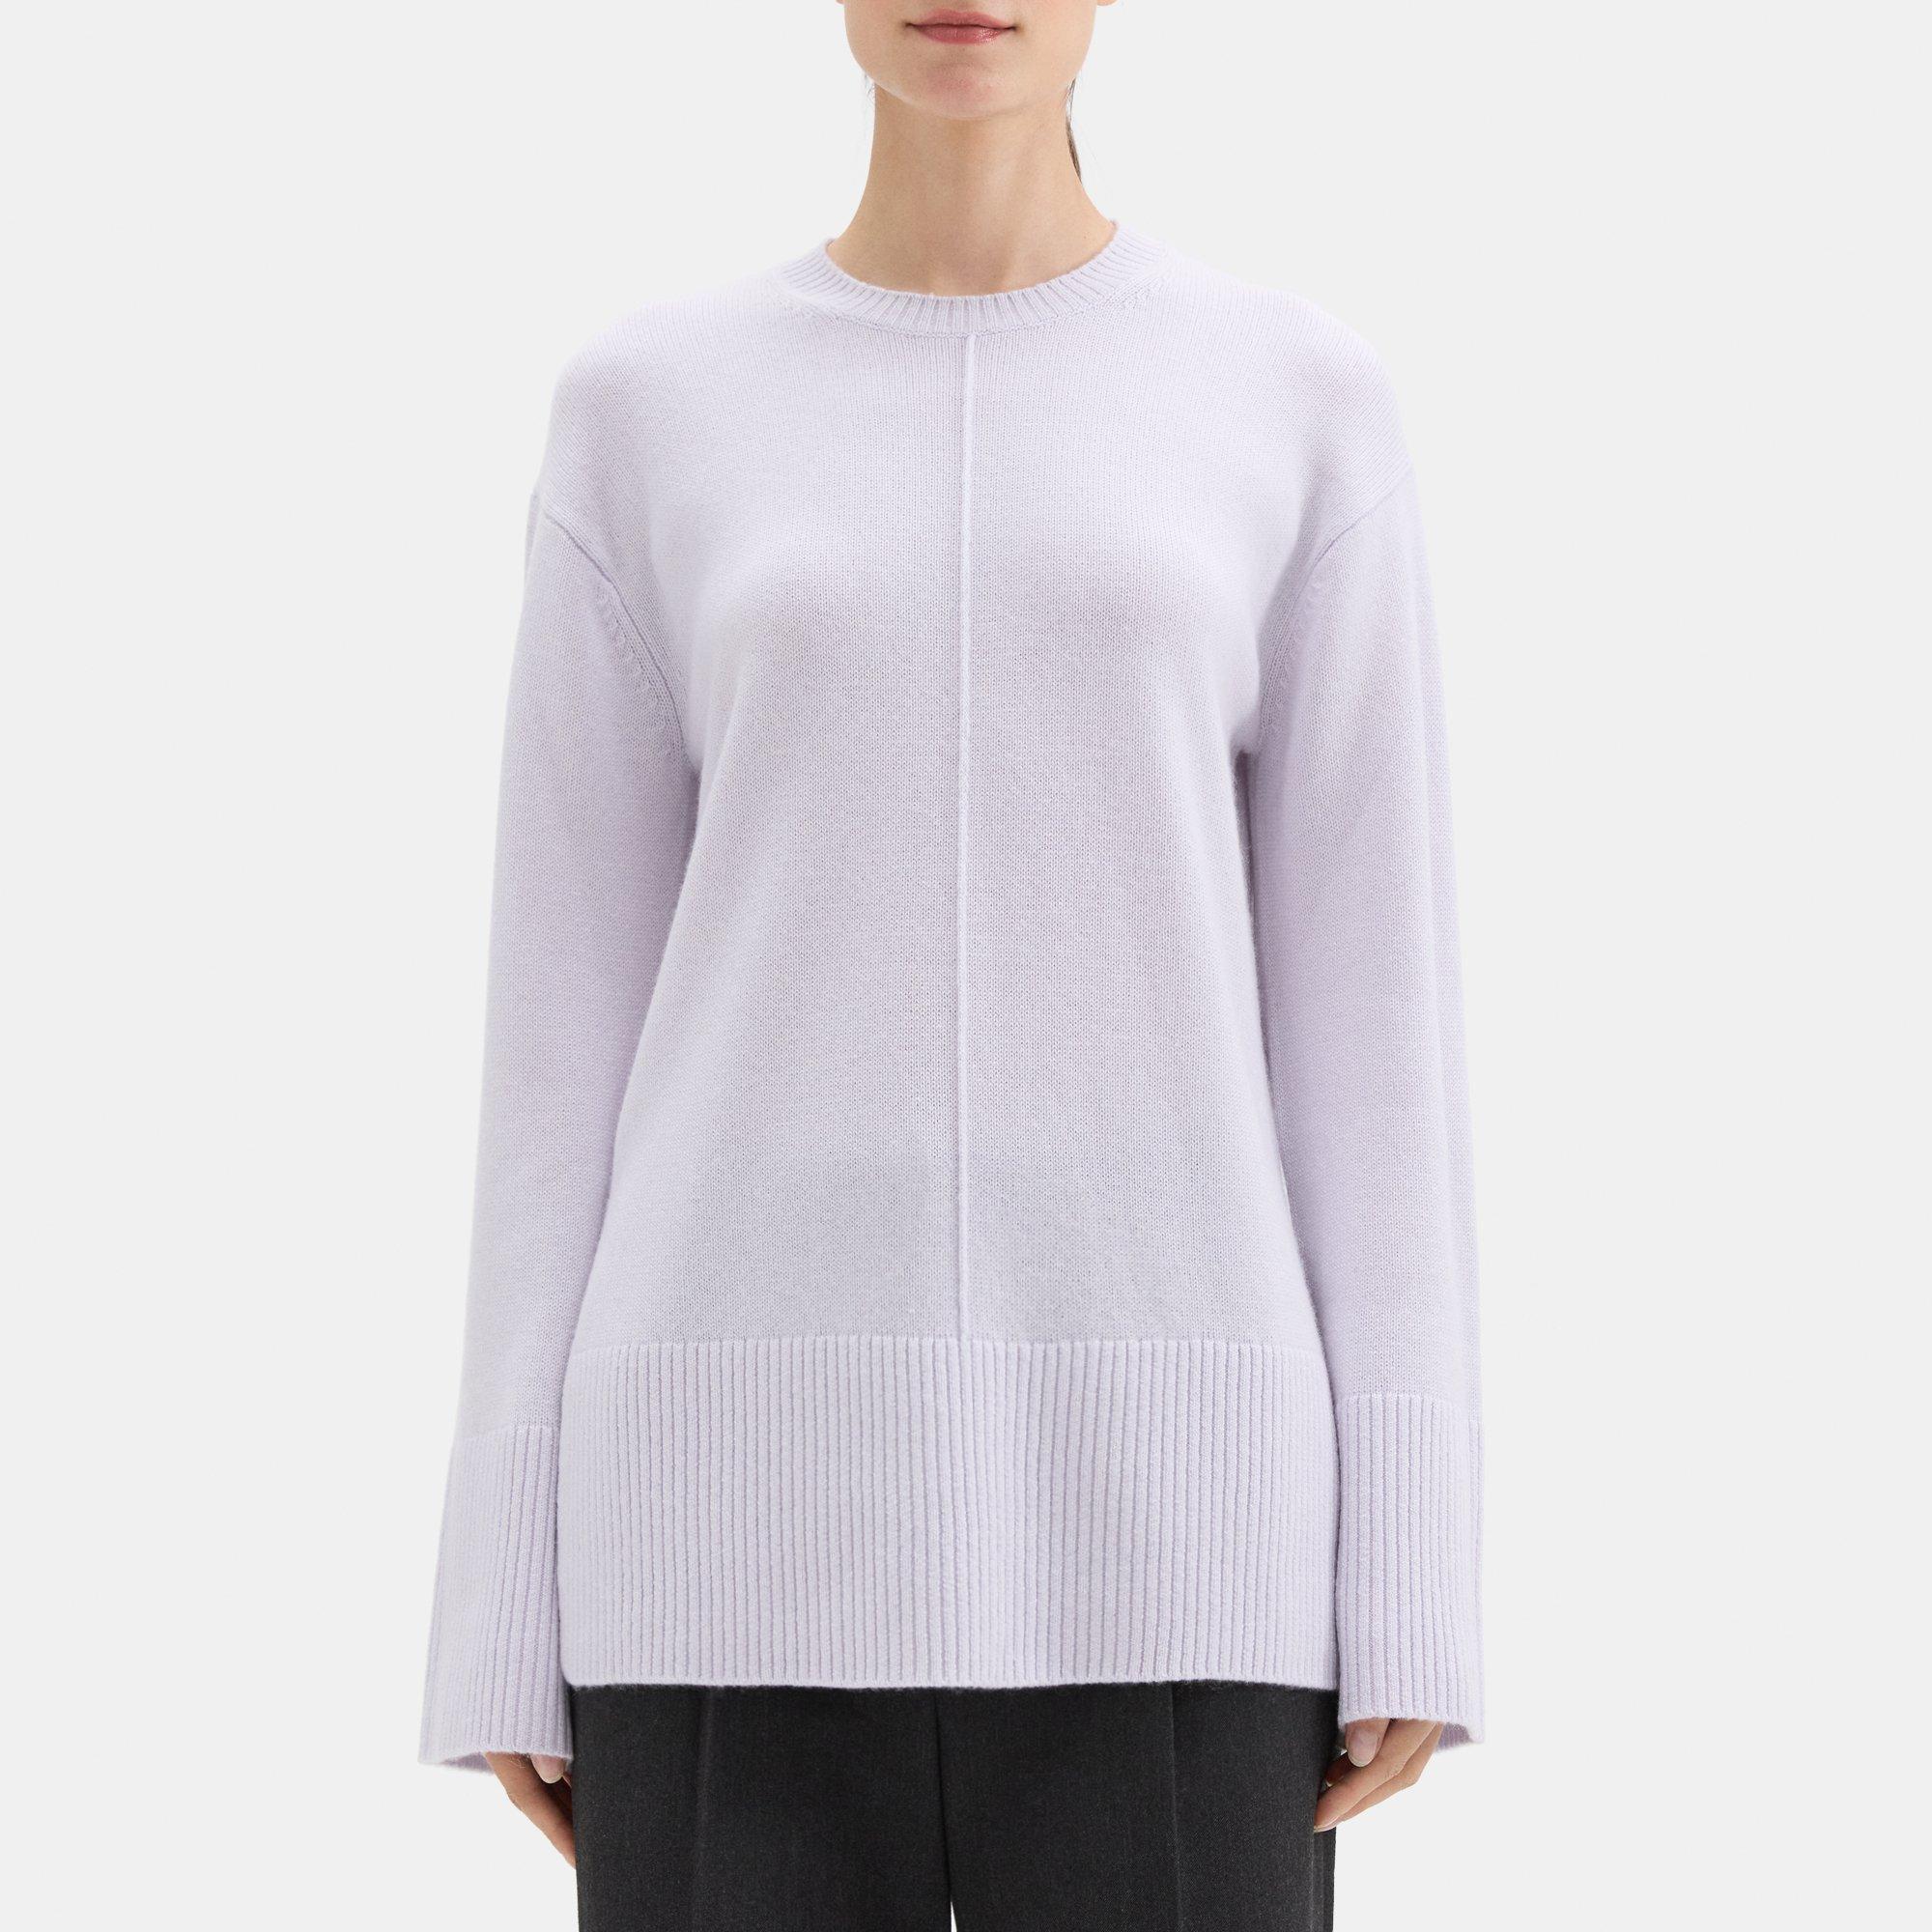 Theory Oversized Crewneck Sweater in Wool-Cashmere